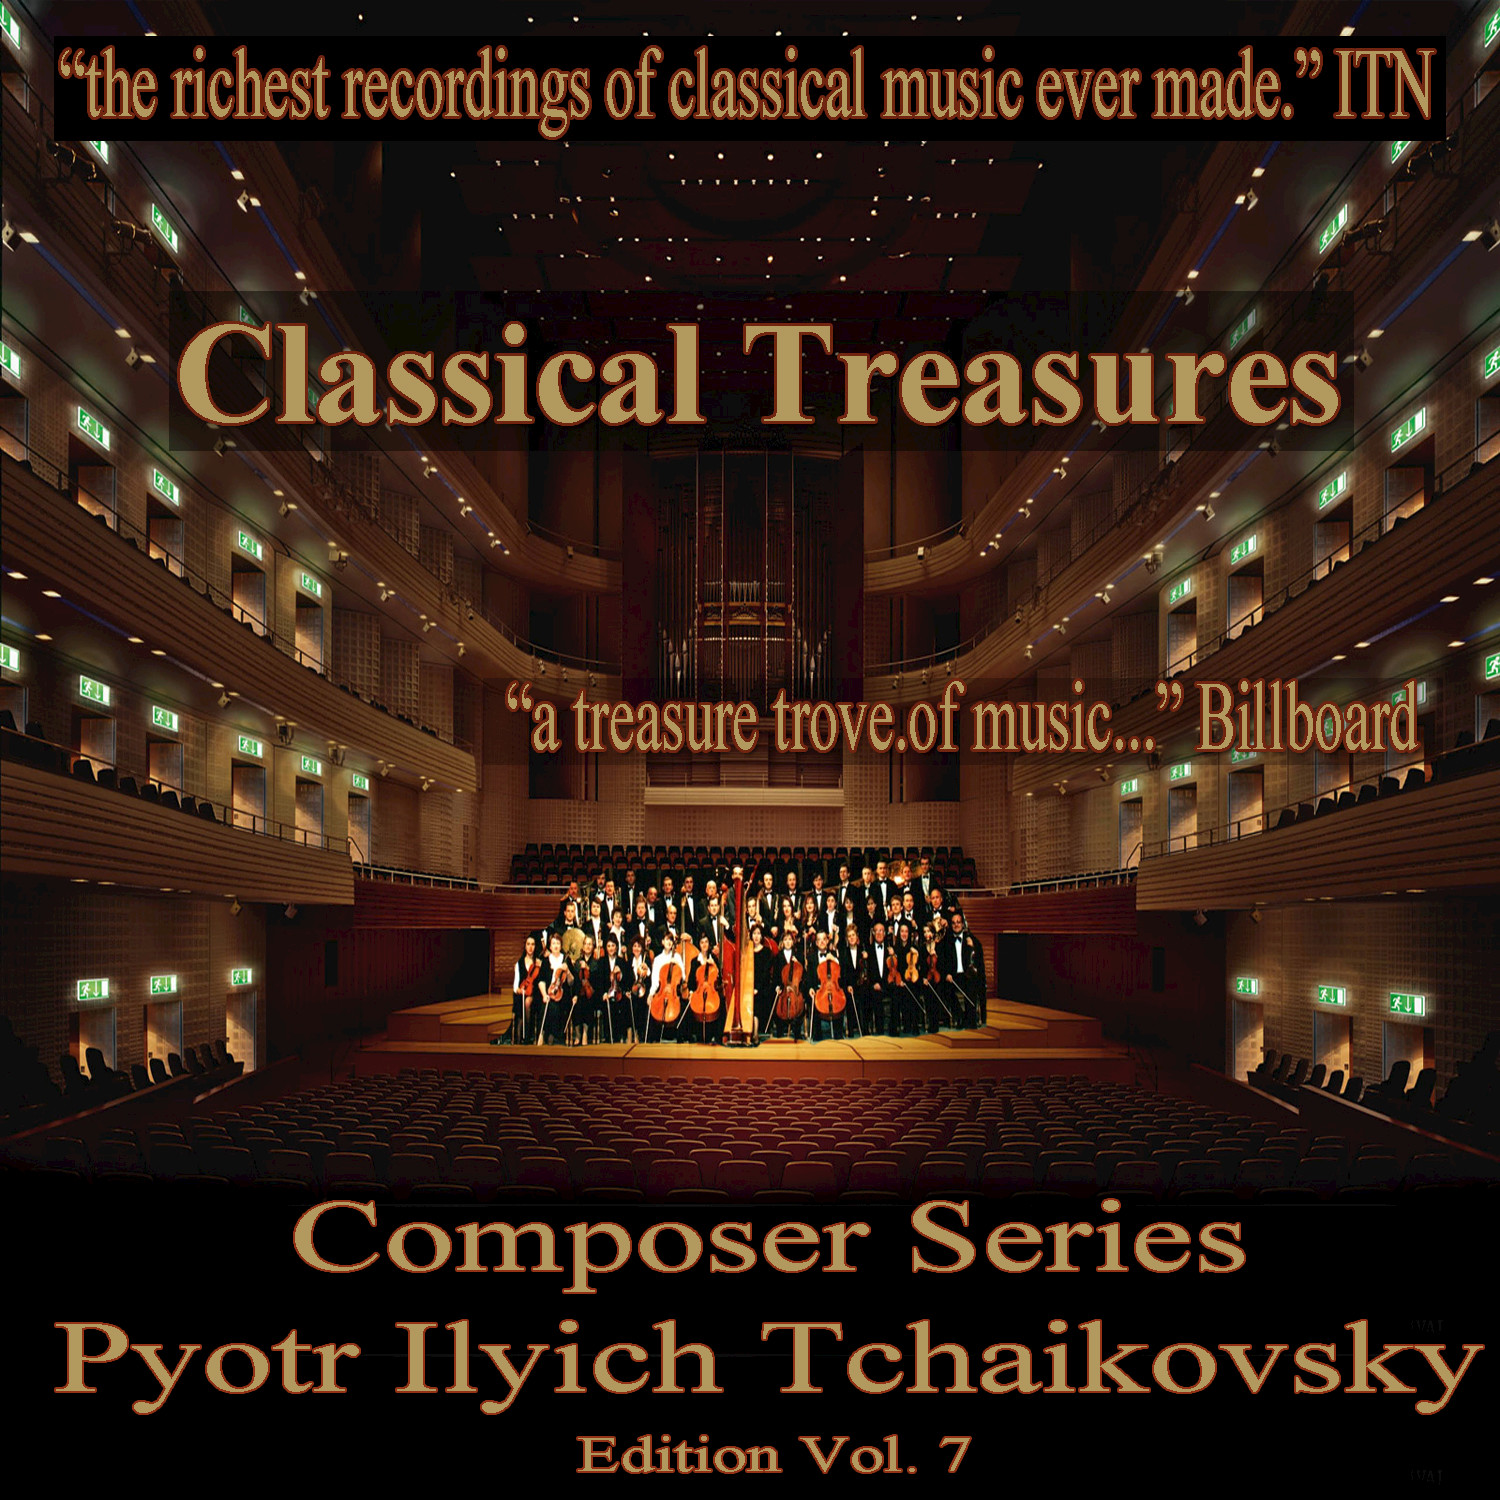 Classical Treasures Composer Series: Pytor Ilyich Tchaikovsky, Vol. 7